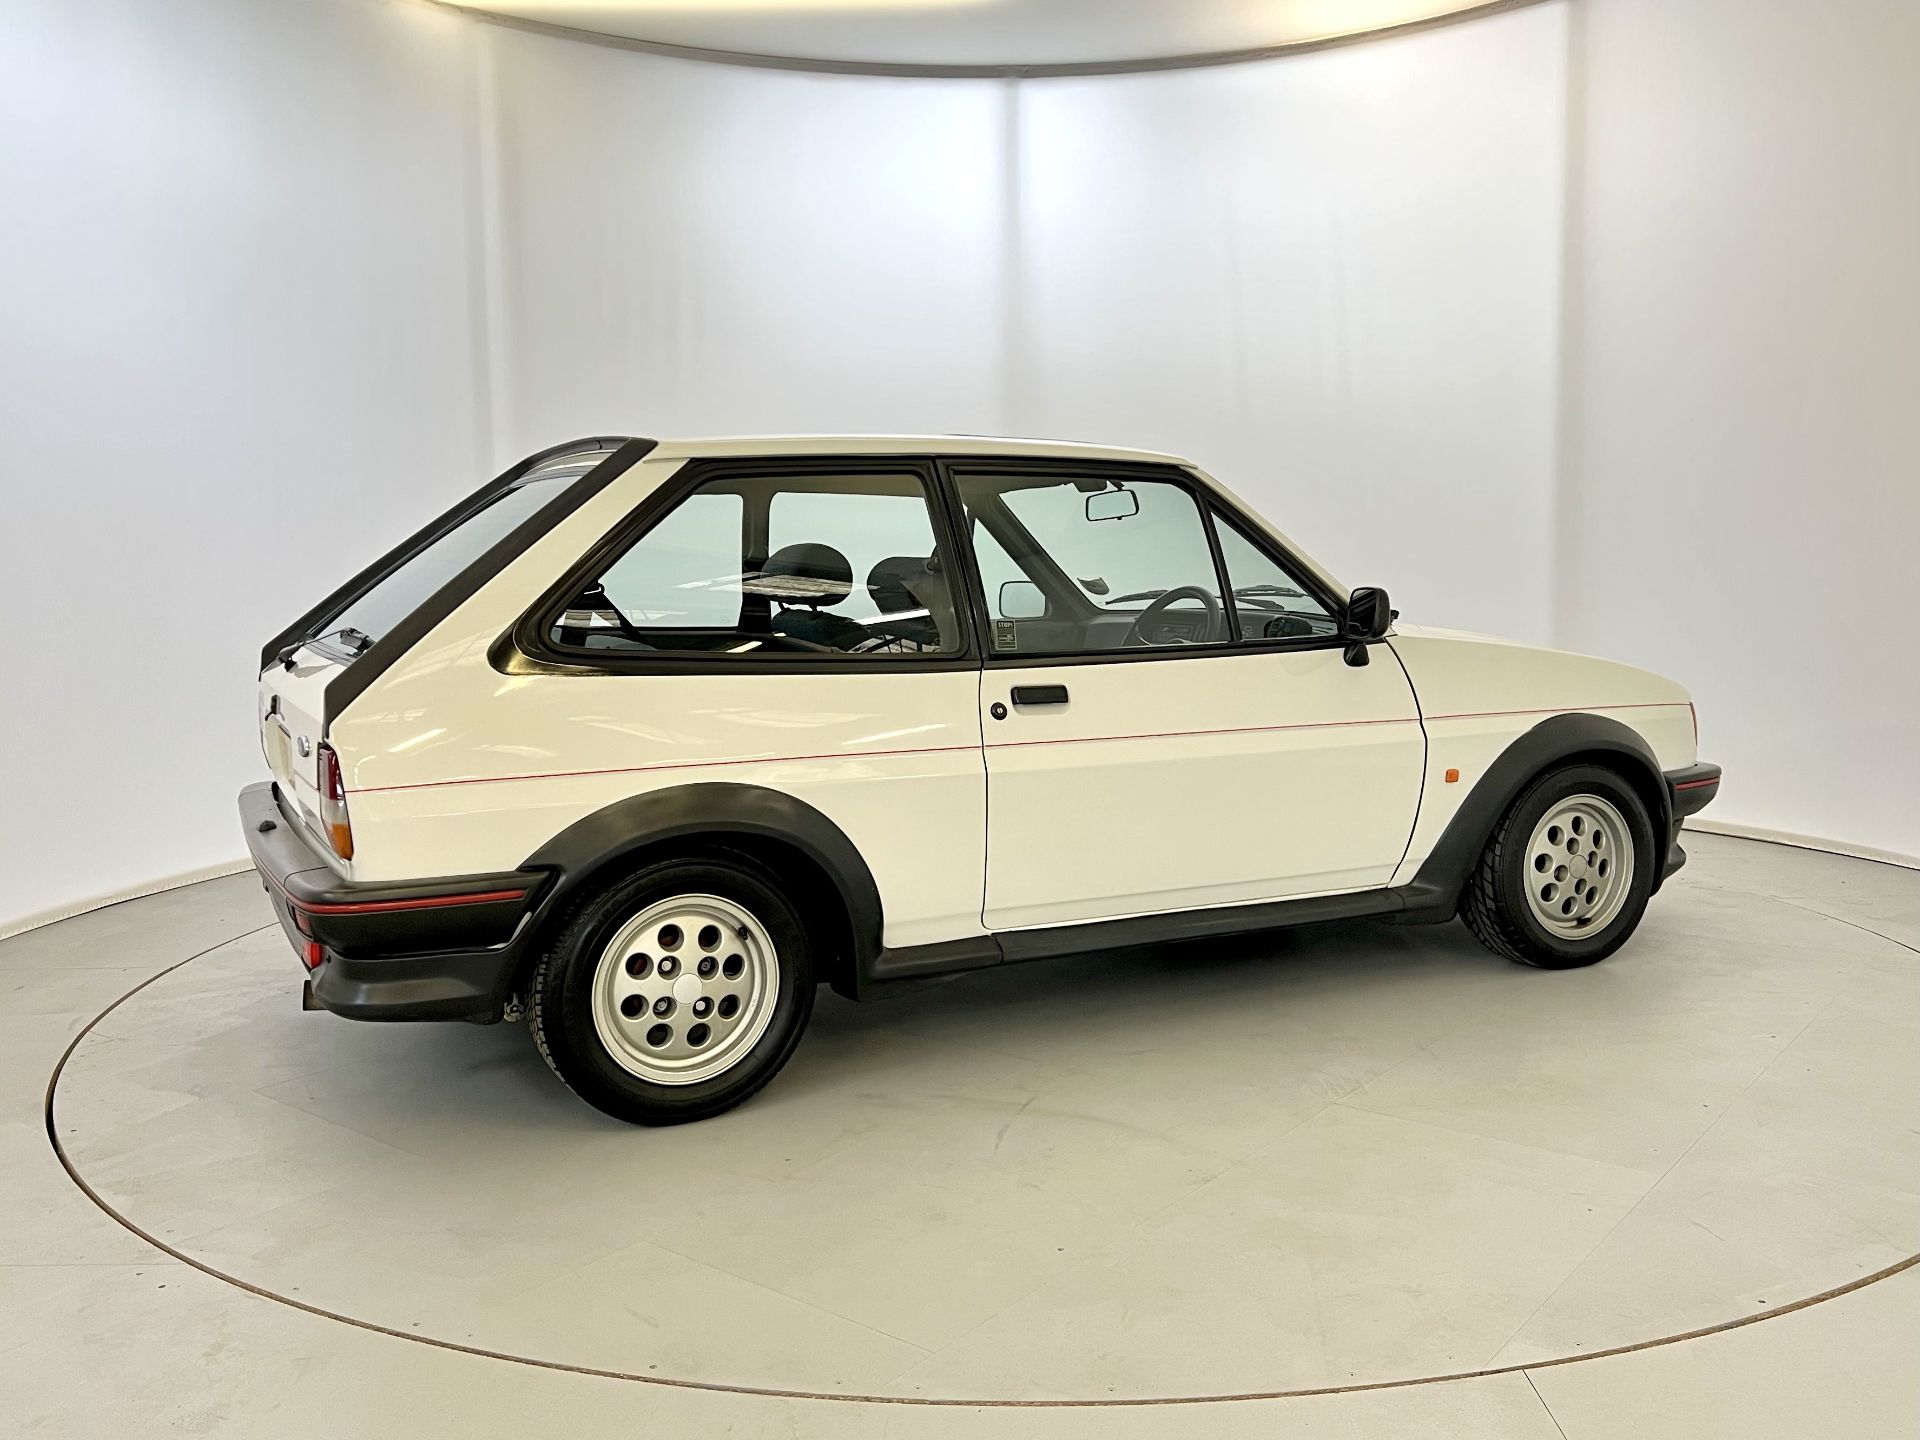 Ford Fiesta XR2 - Image 10 of 37